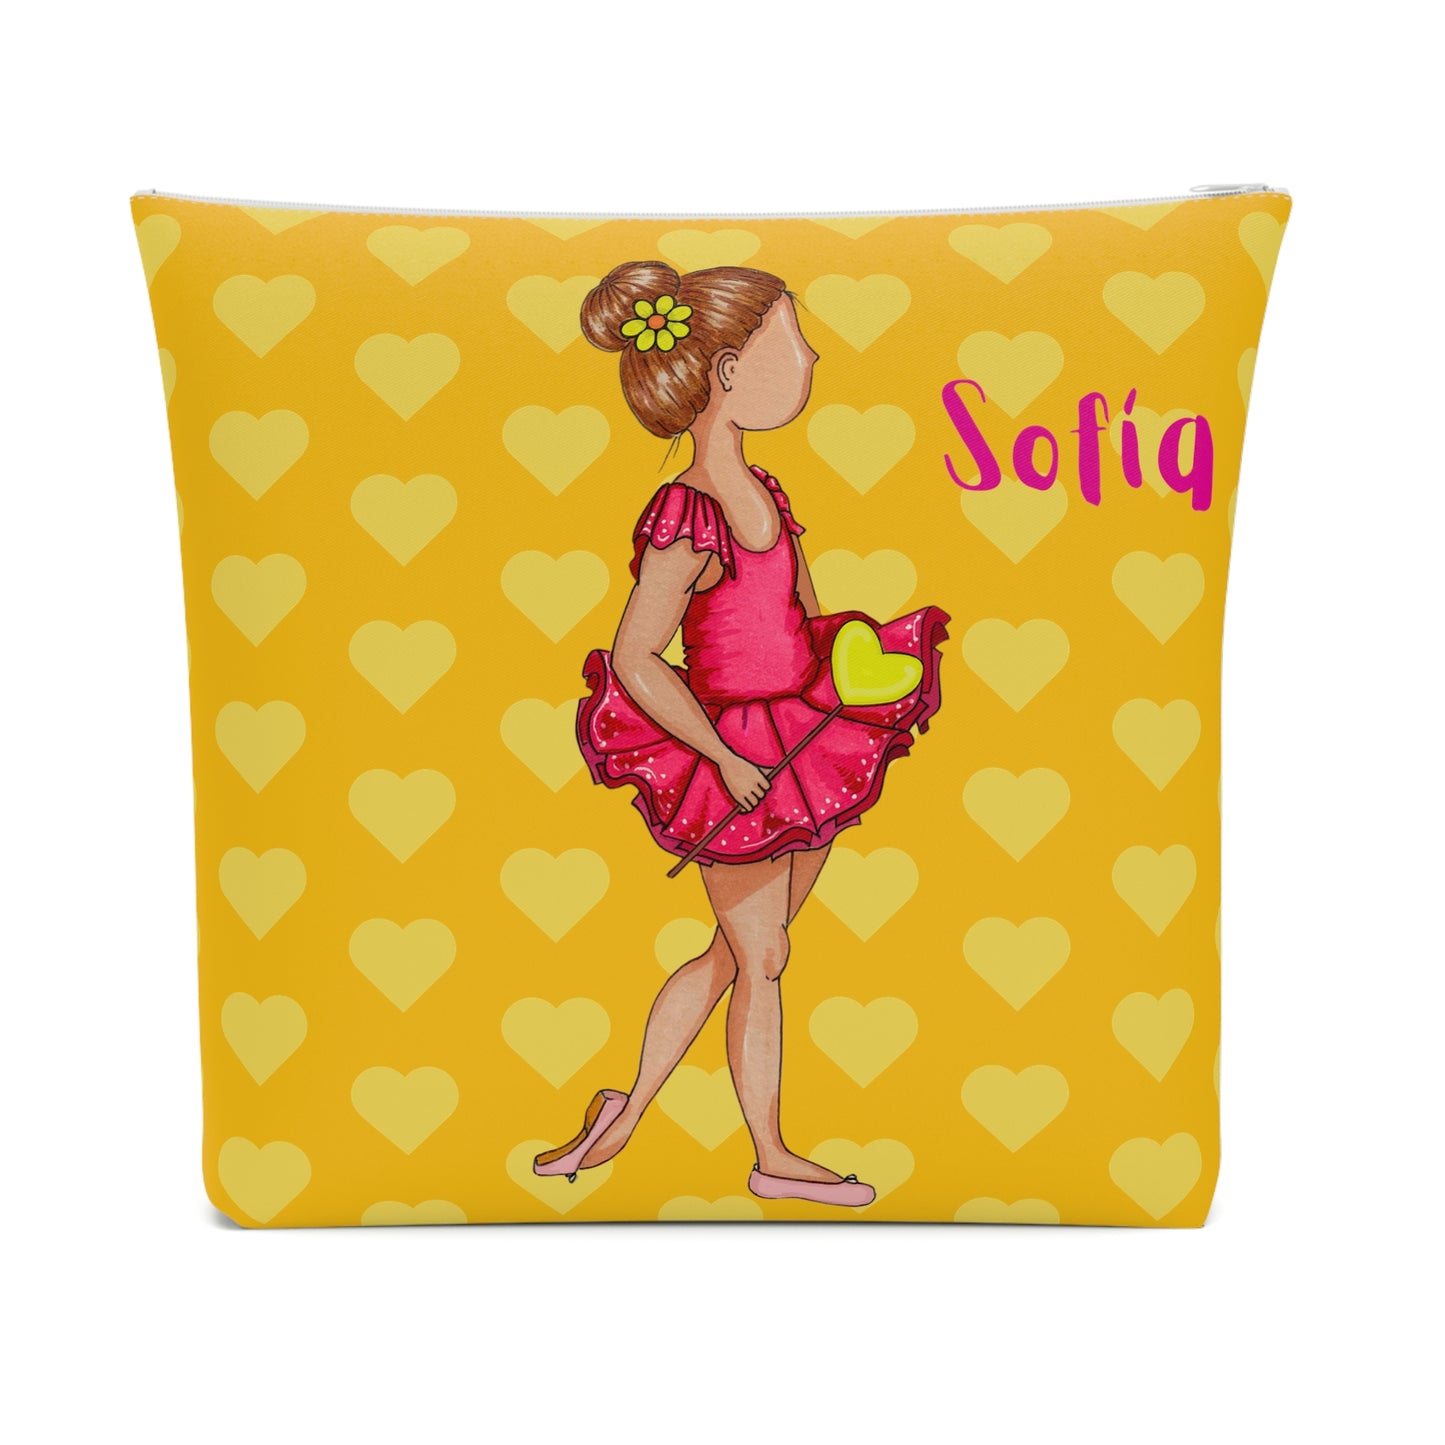 Ballerina Dancer Customizable all purpose cotton bag, yellow background with hearts and a ballerina in a pink dress.